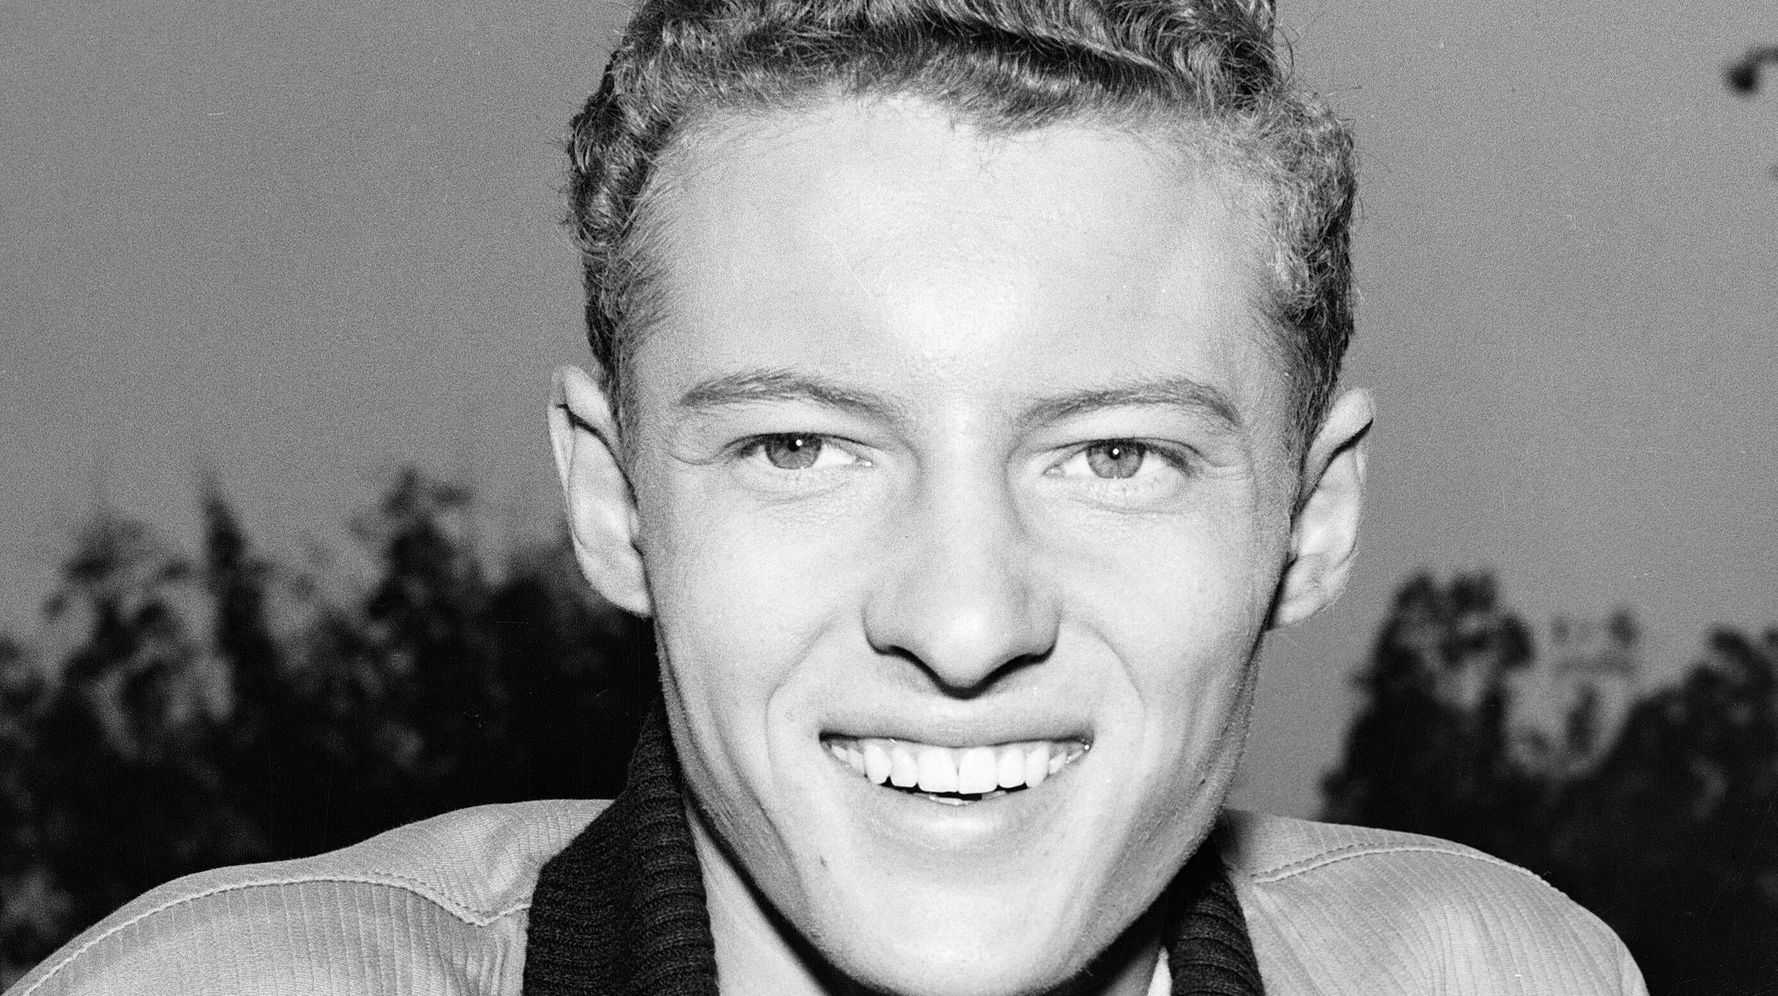 Ken Osmond Who Played Eddie Haskell On Leave It To Beaver Dies At 76 Huffpost Canada